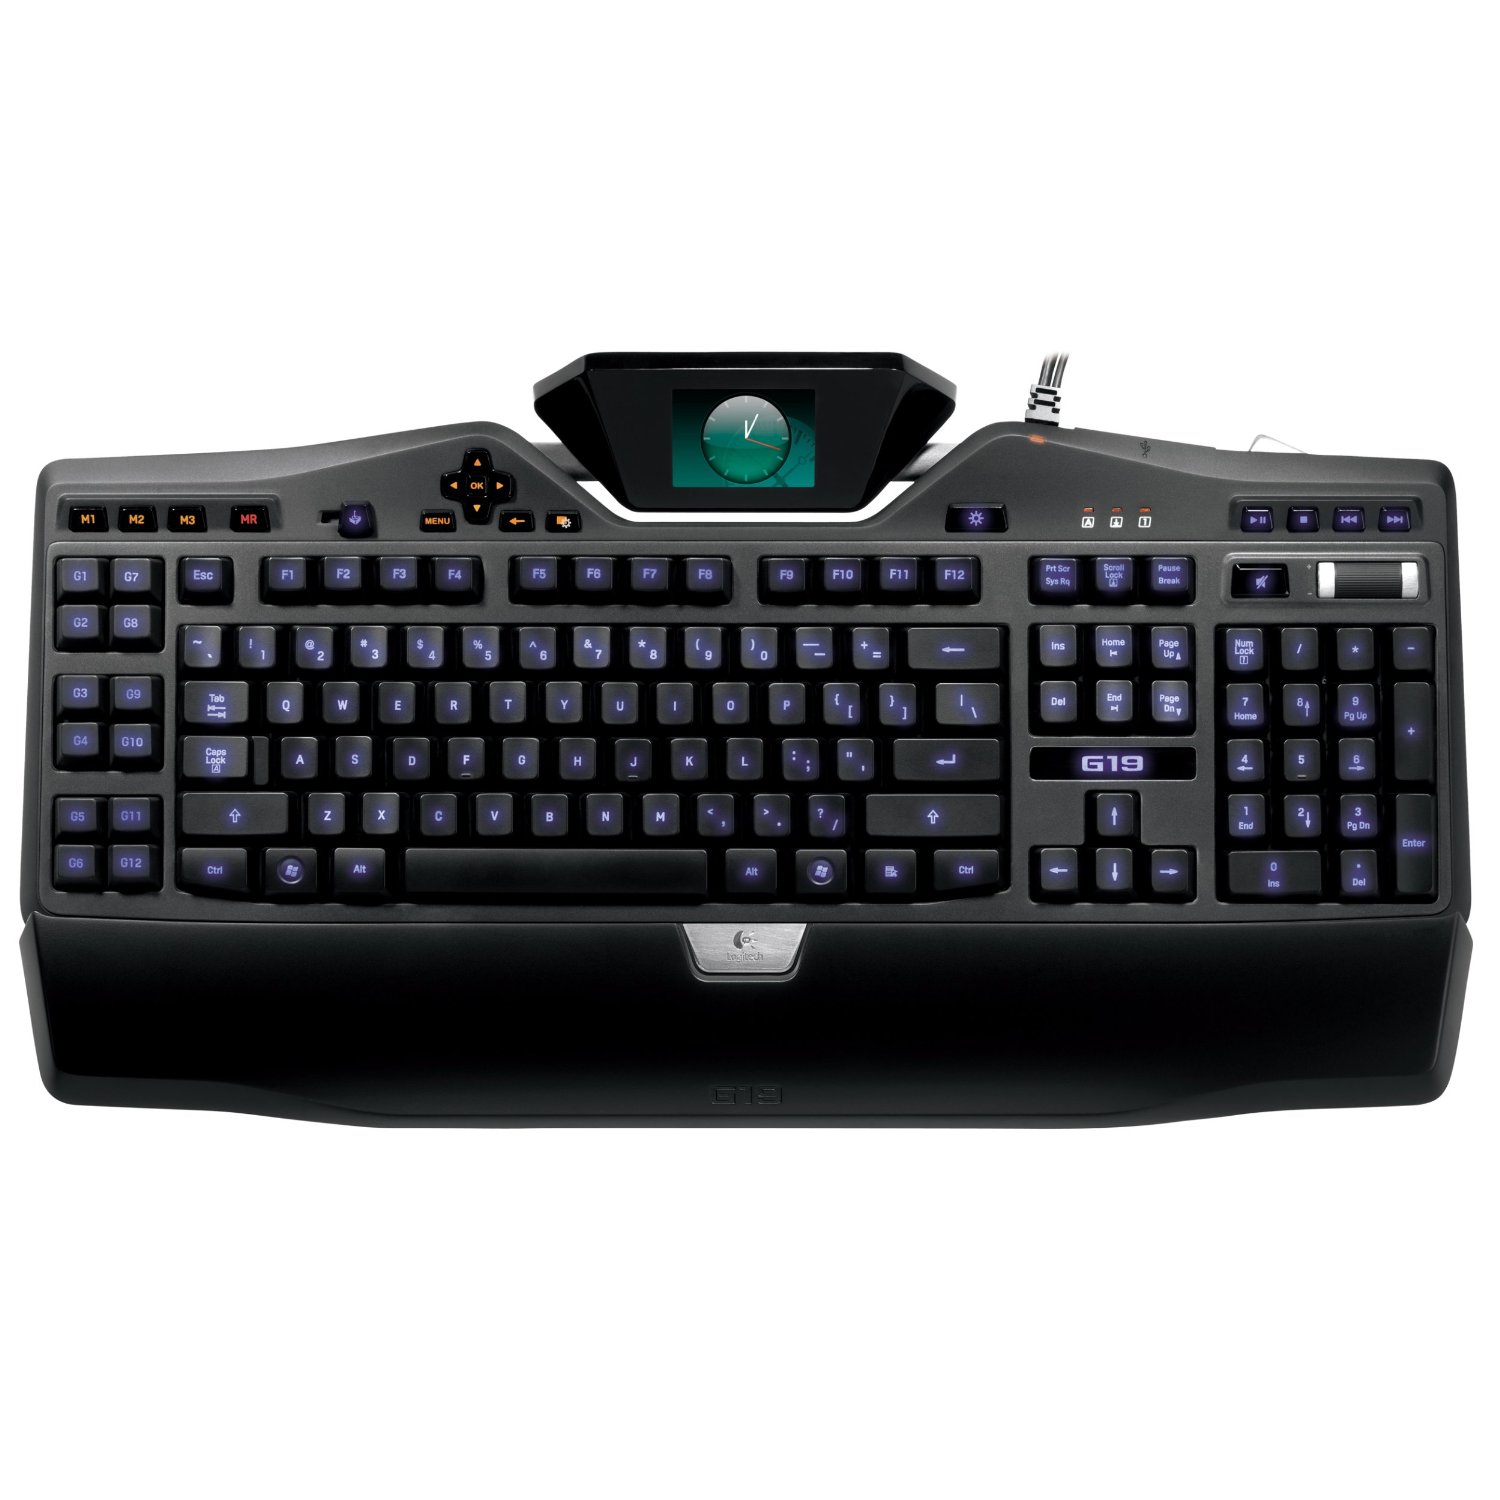 http://thetechjournal.com/wp-content/uploads/images/1110/1317696947-logitech-g19-programmable-gaming-keyboard-with-color-display-9.jpg